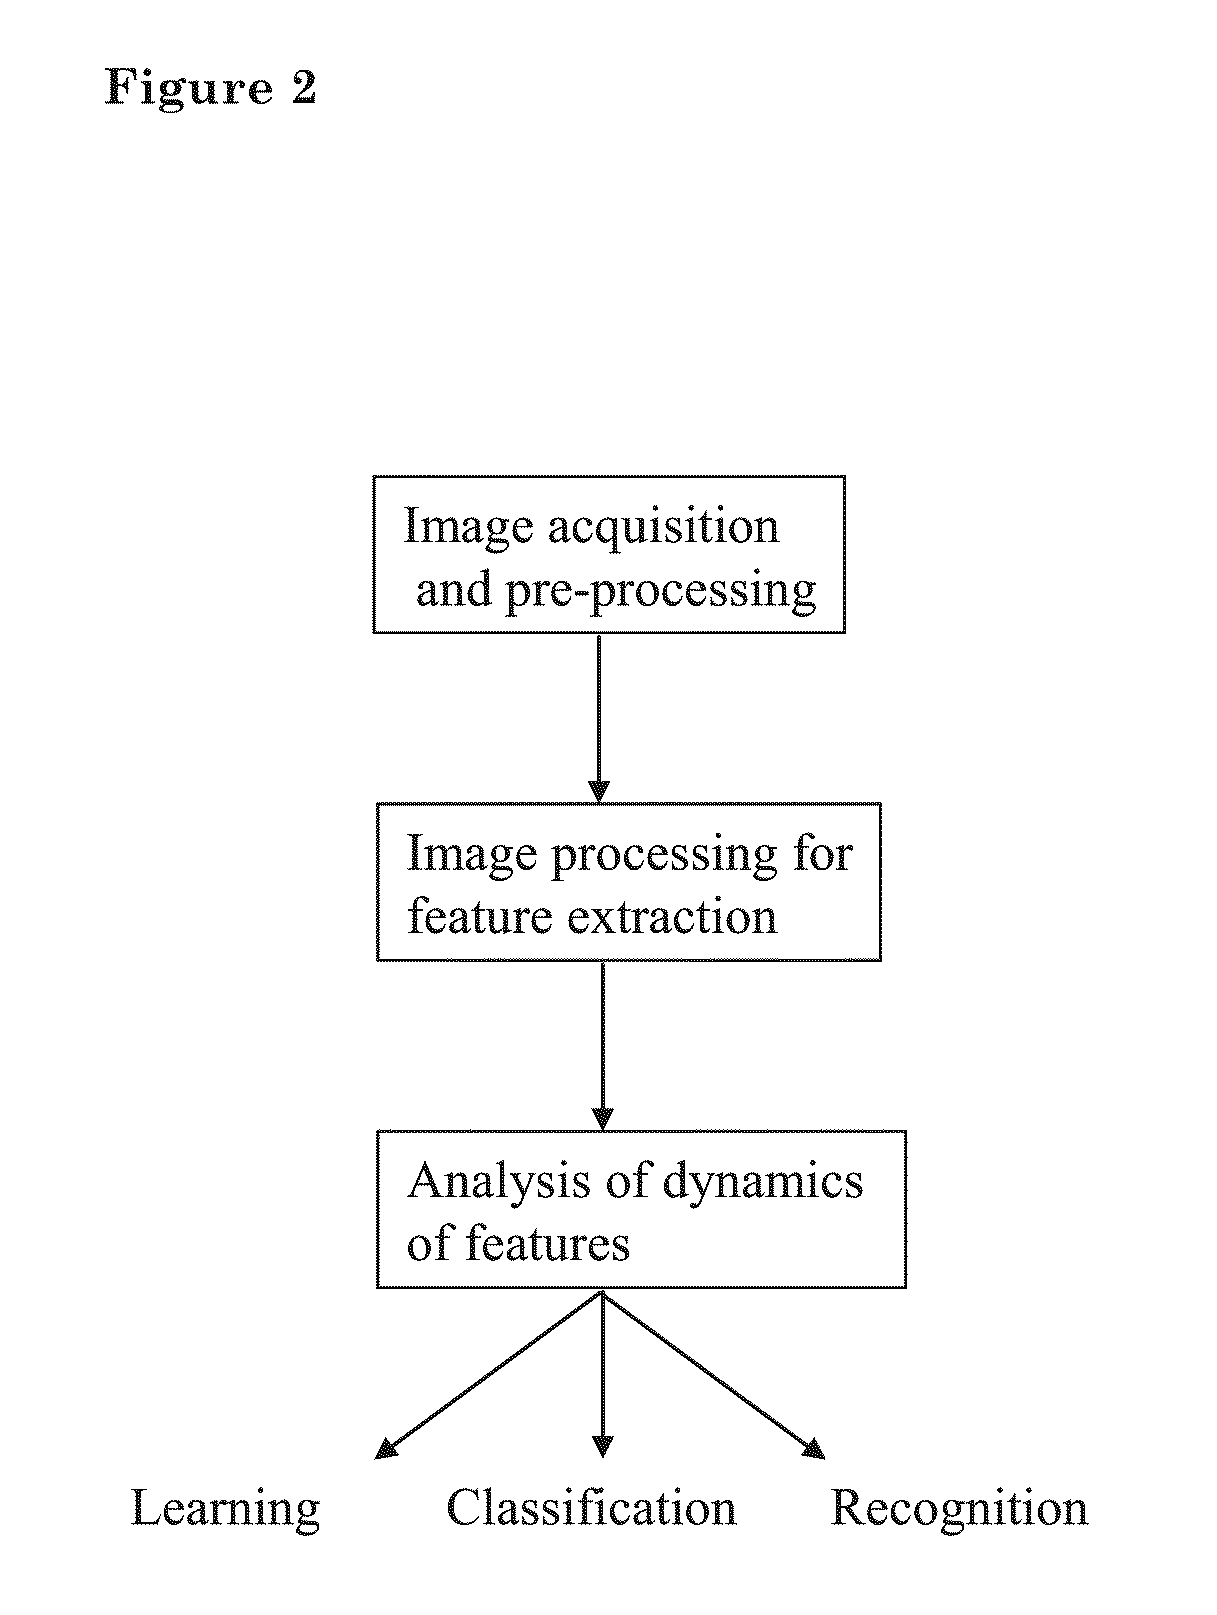 Method for using information in human shadows and their dynamics